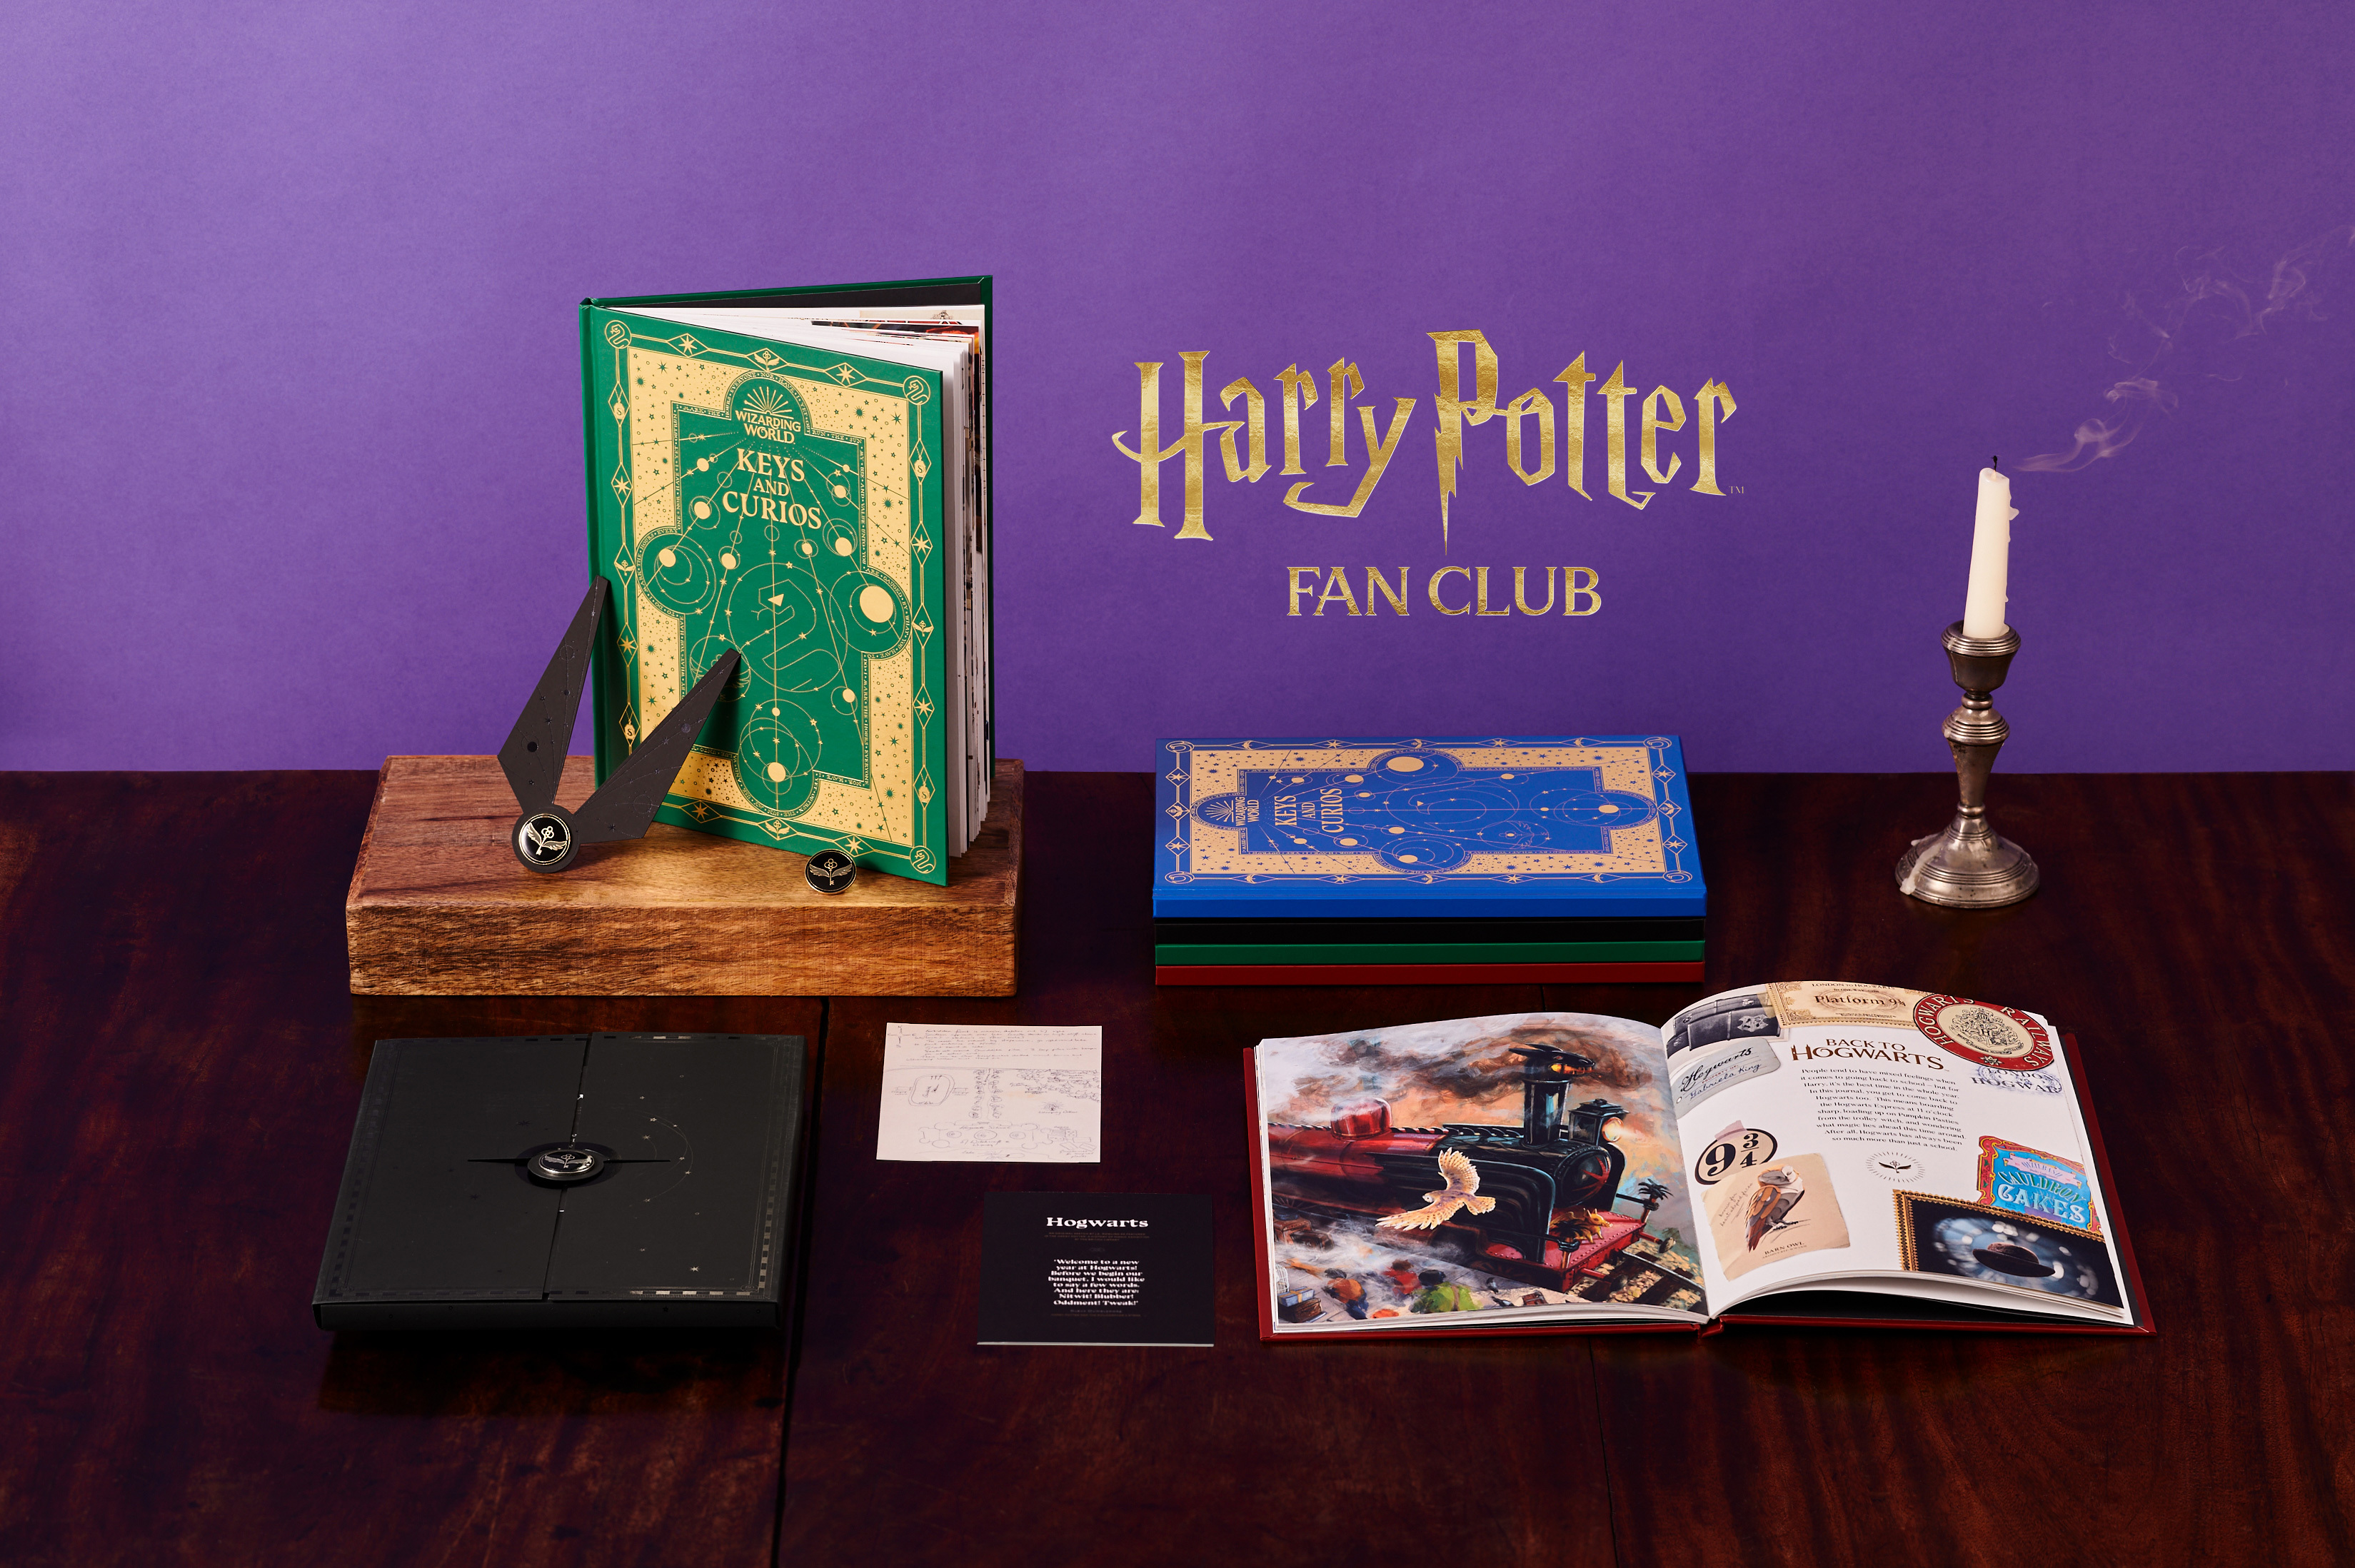 WIZARDING WORLD GOLD  An EXCLUSIVE LOOK at the NEW Harry Potter Fan Club 